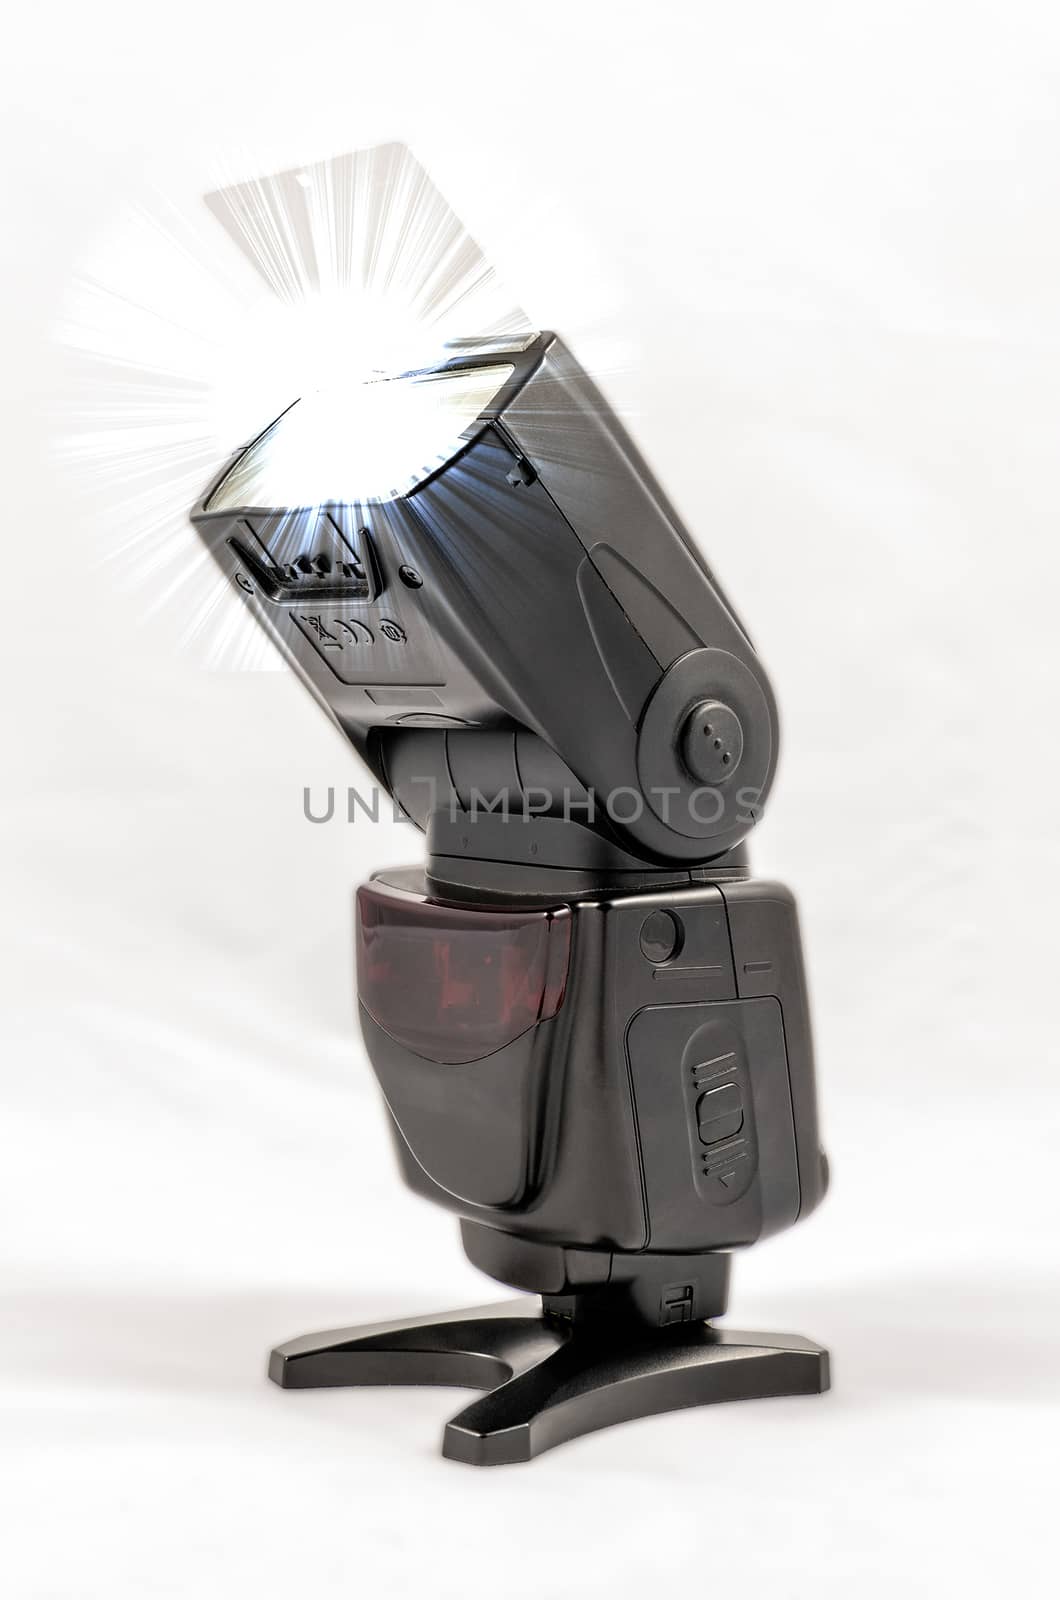 Unbranded external flash unit for DSLR camera by marcorubino